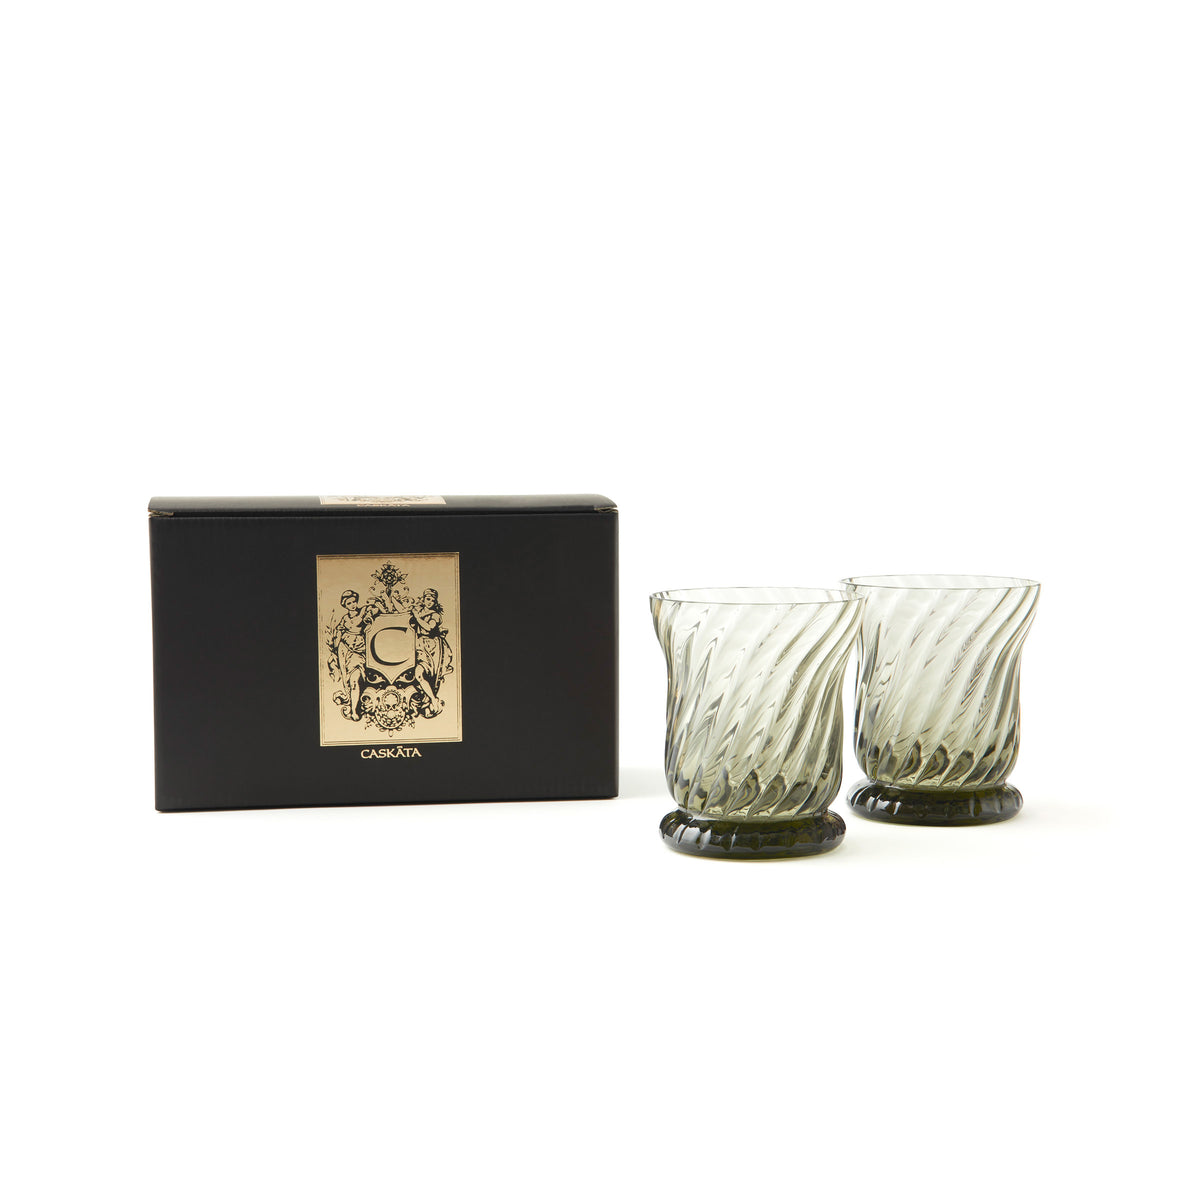 Quinn Smoke Green Mouth-blown Crystal Votive Candle Holders from Caskata.